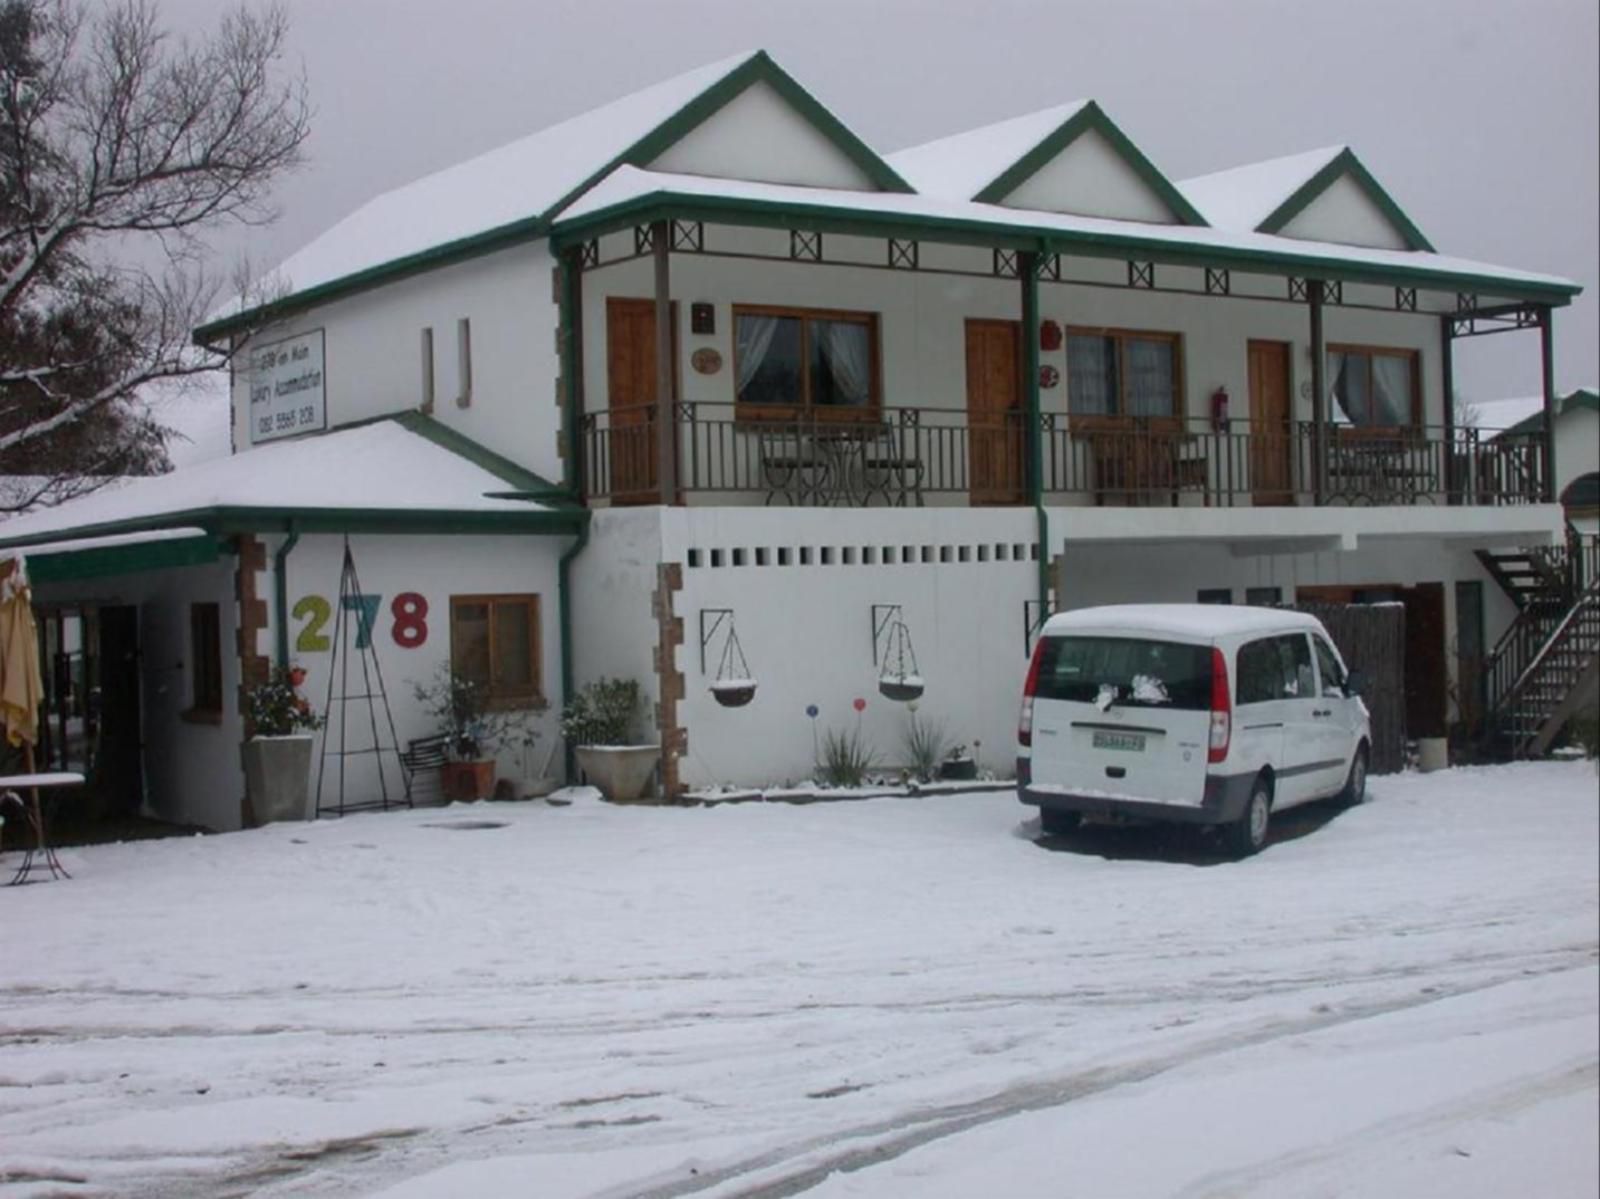 278 On Main Clarens Free State South Africa Unsaturated, House, Building, Architecture, Snow, Nature, Winter, Car, Vehicle